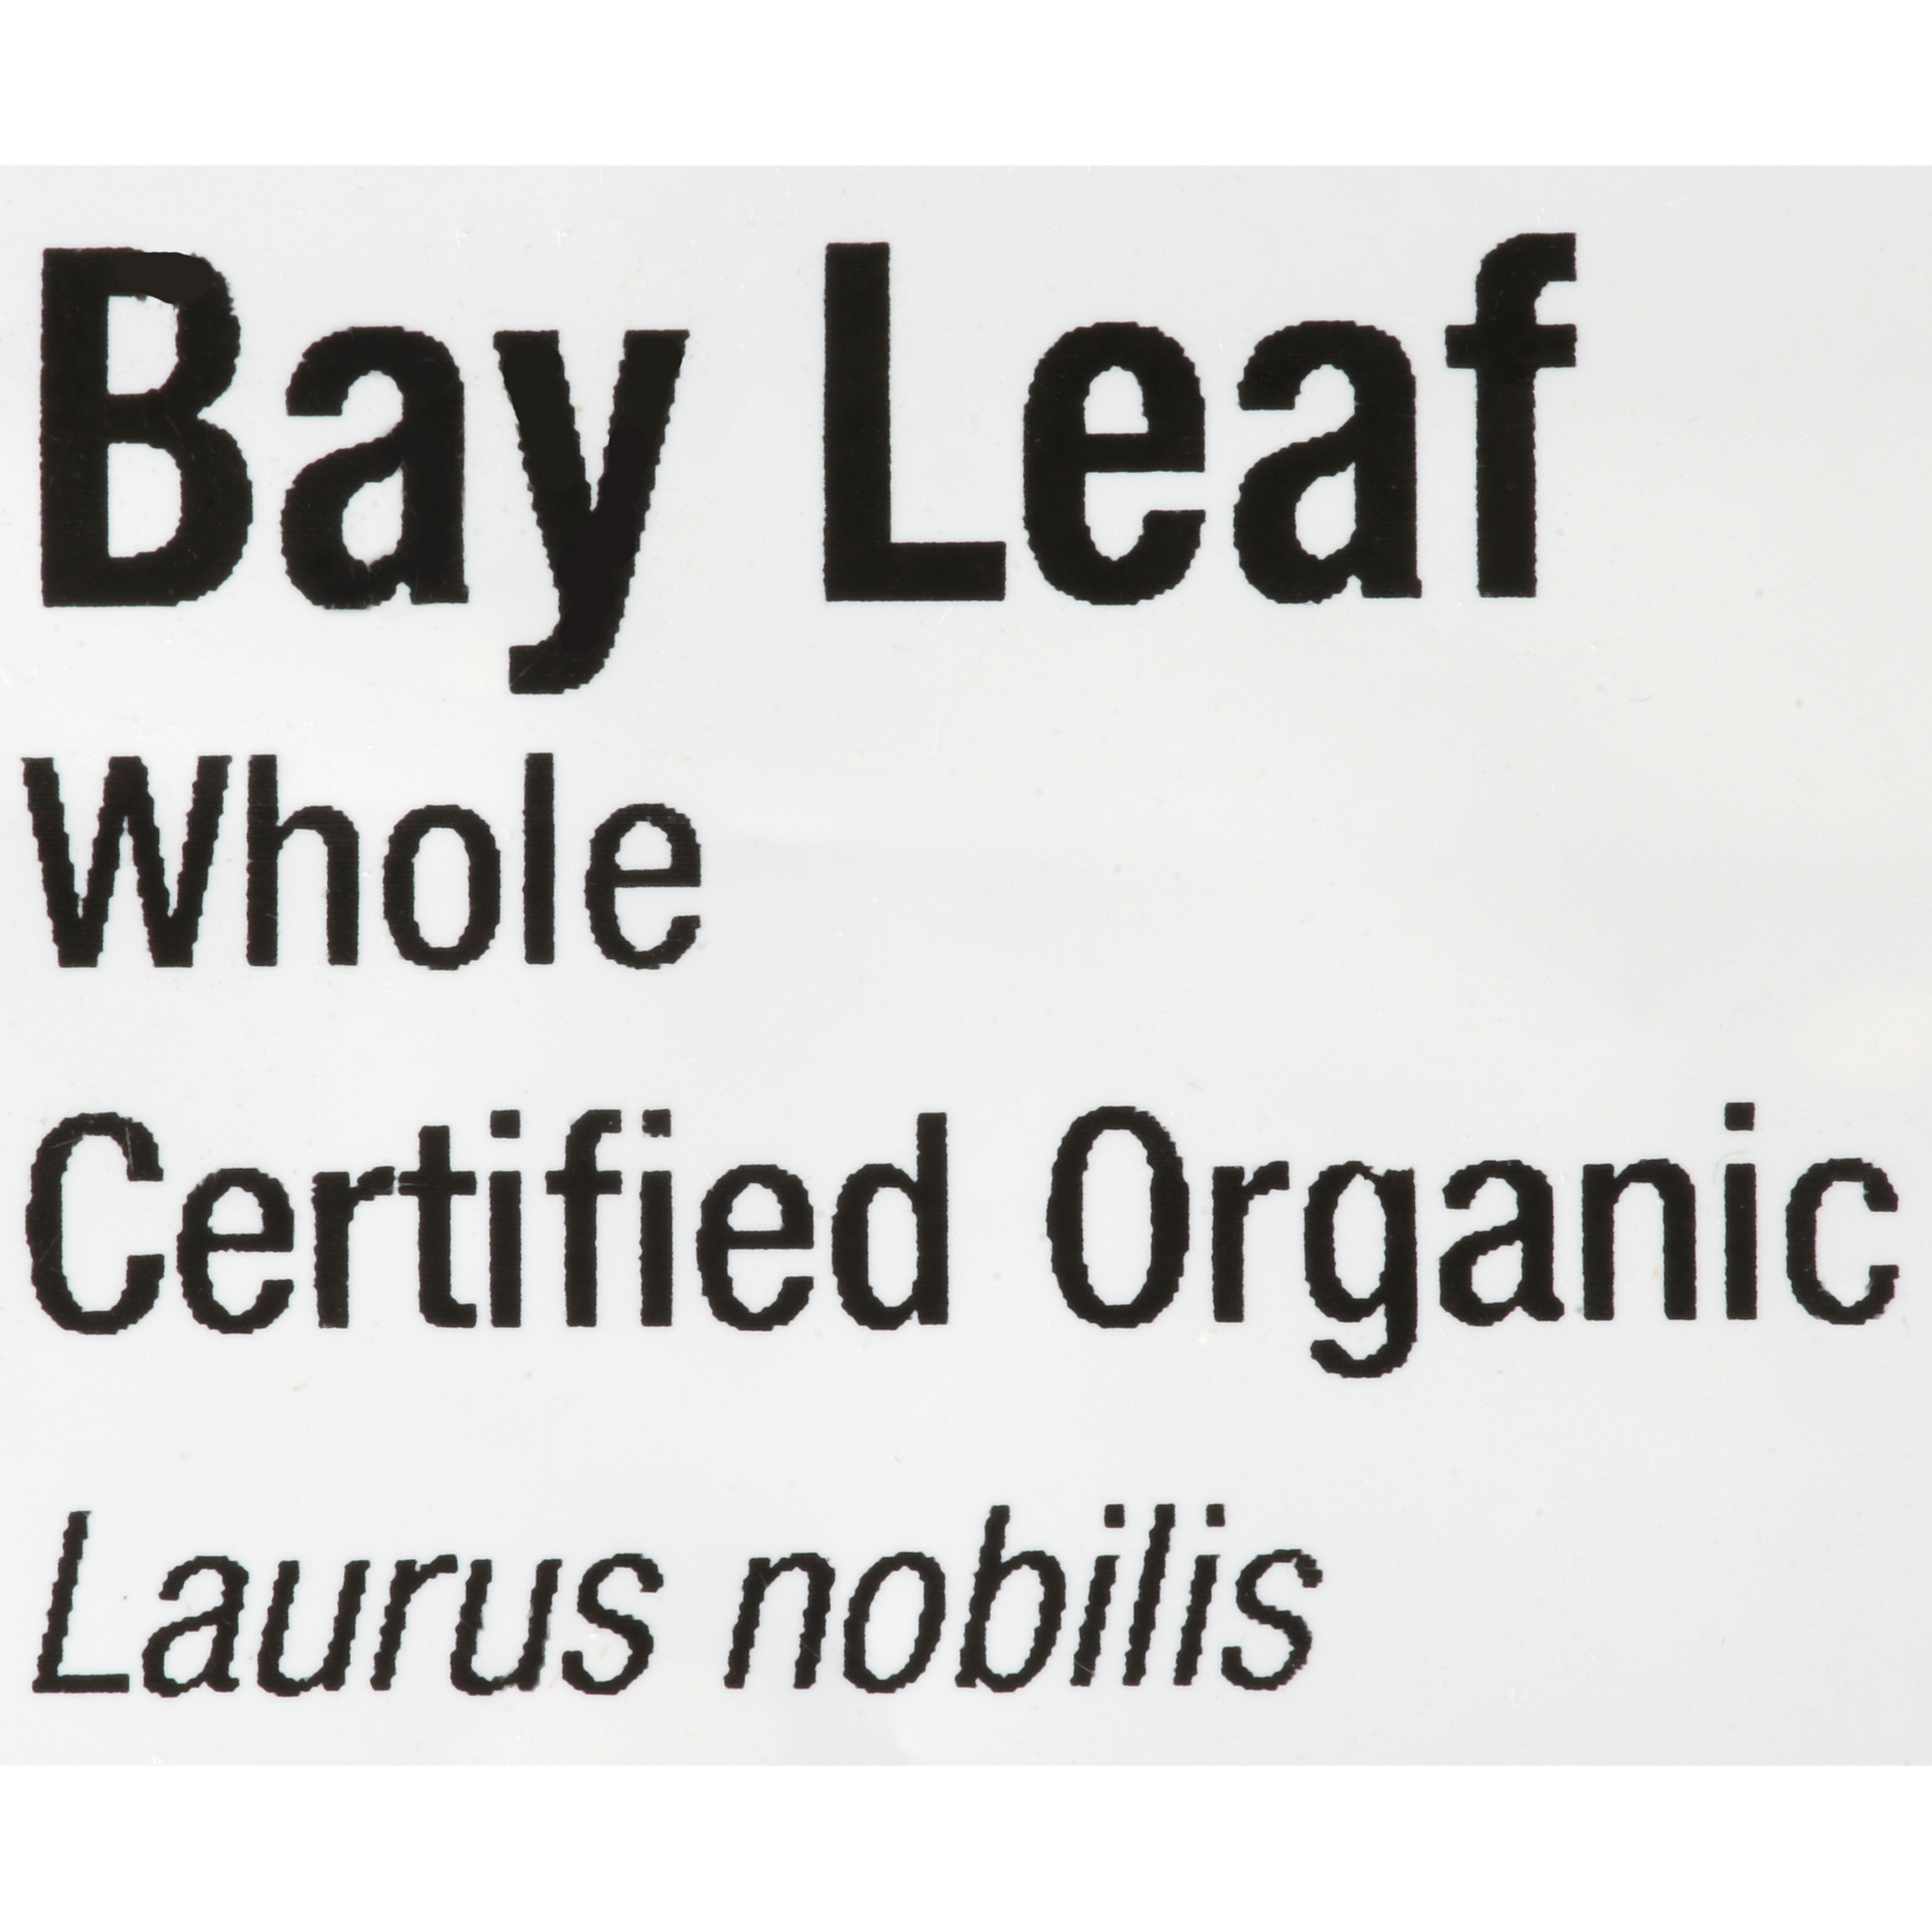 Frontier Co-Op Hand-Select Bay Leaf, Whole, Certified Organic, Bulk 16 oz. - image 5 of 8